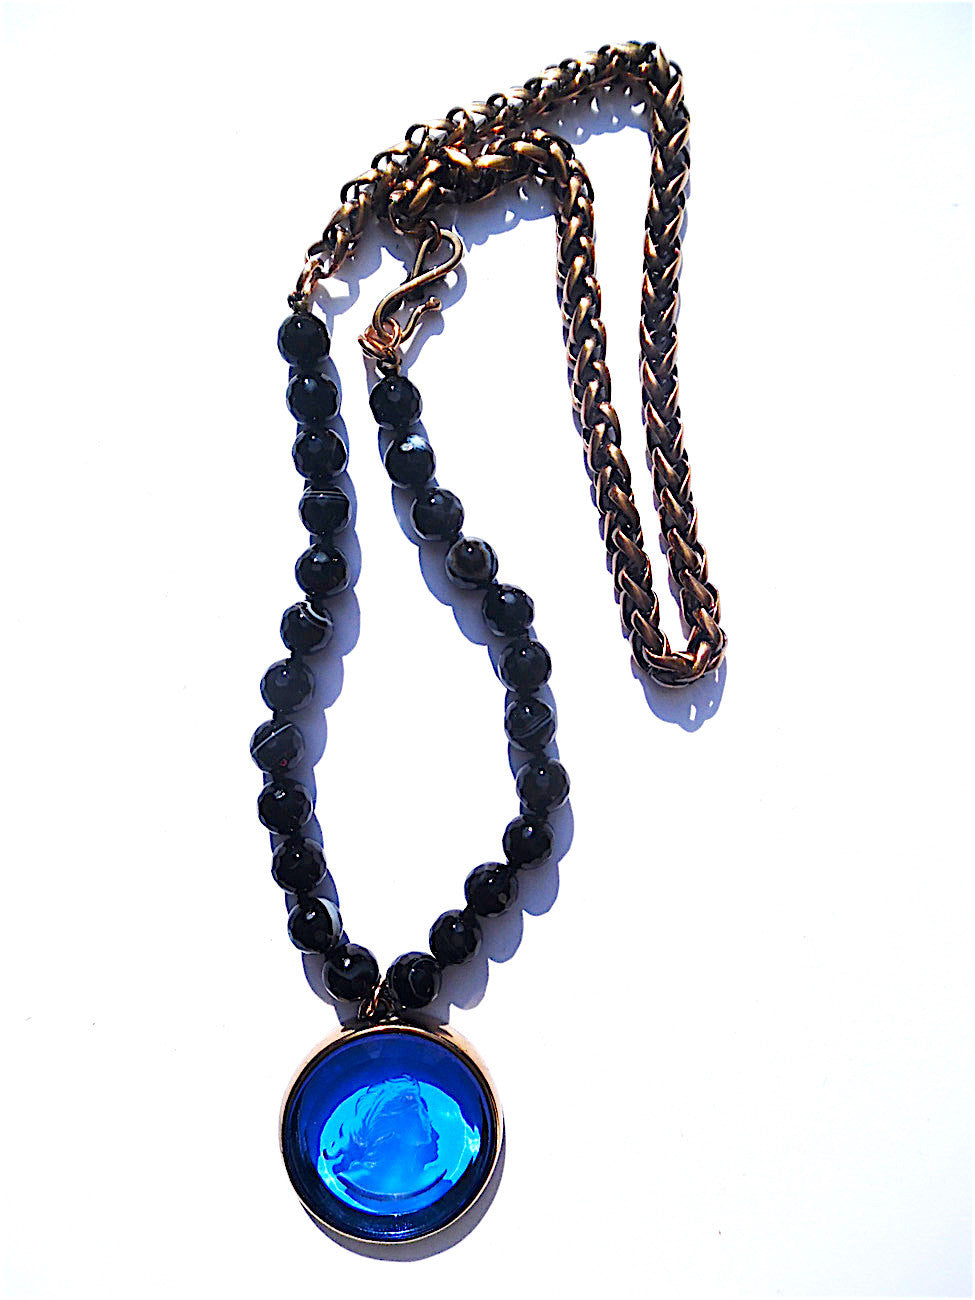 Necklace Intaglio Faceted Glass Beads and Mesh Rope Chain